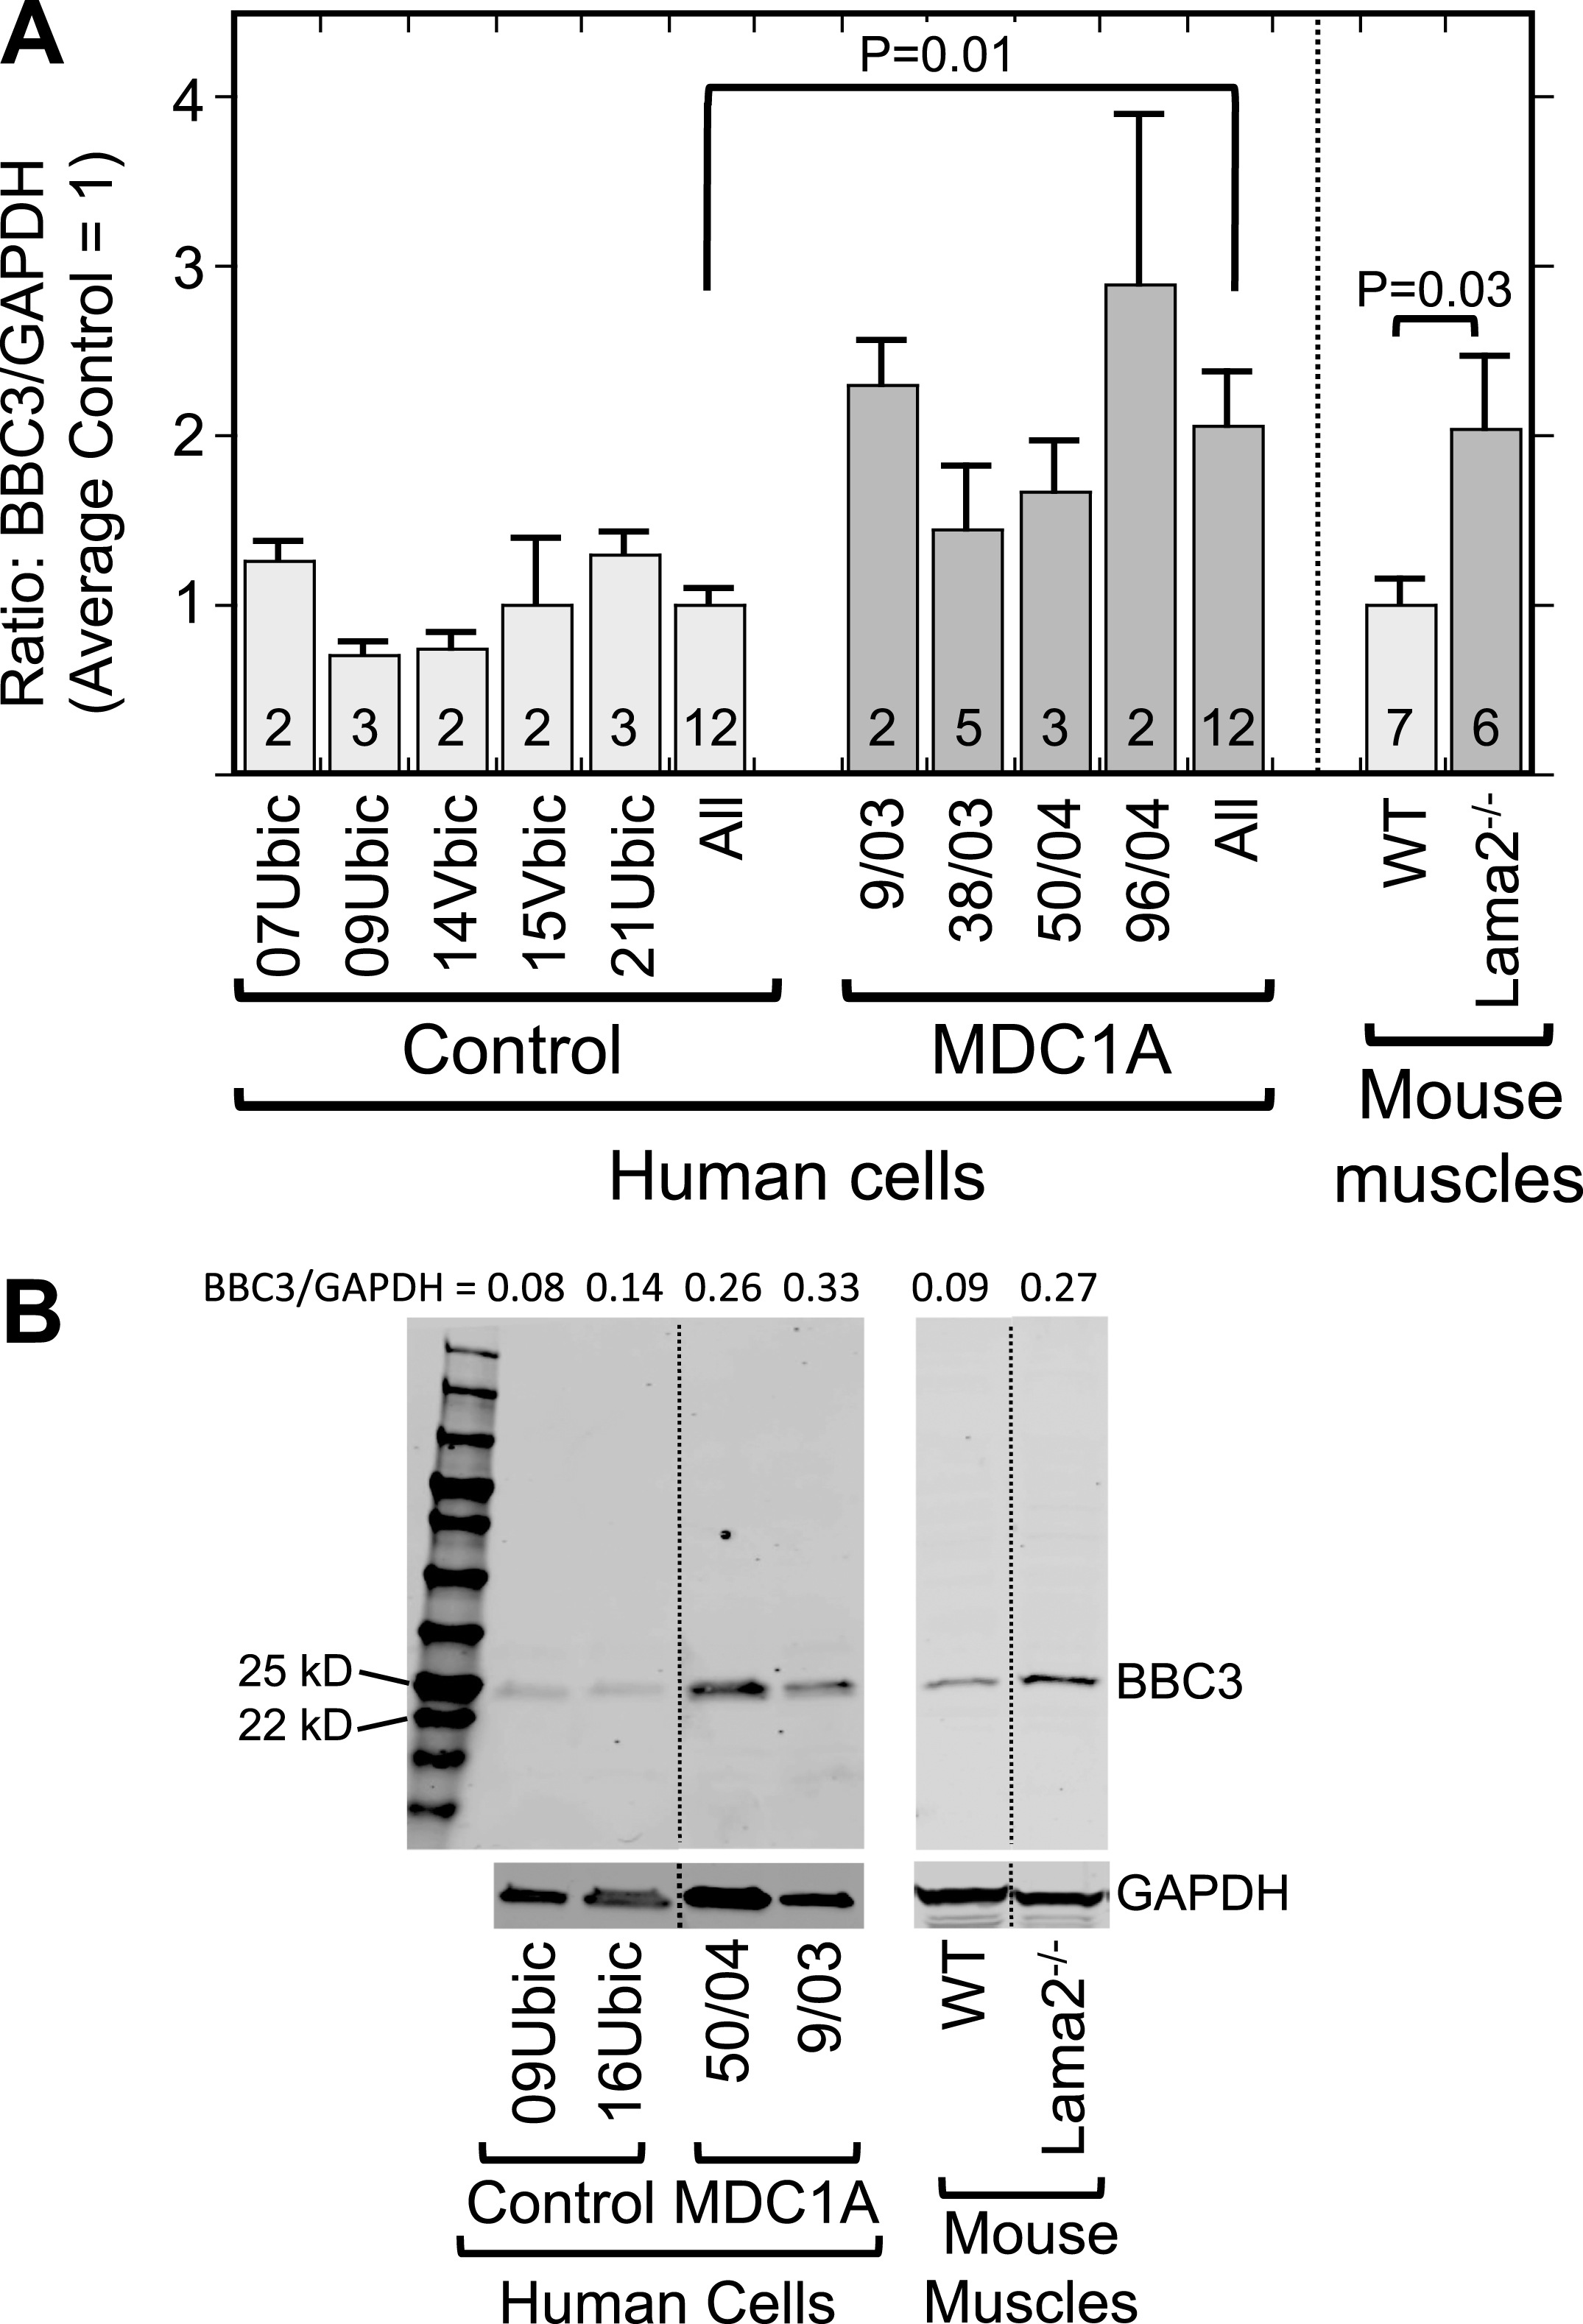 Laminin-α2-deficient human myogenic cells and mouse muscles show increased levels of the p53-regulated BBC3 protein. A. Expression of BBC3 (PUMA) was increased both in differentiated MDC1A compared to healthy control myogenic cell cultures and in Lama2–/– compared to wild-type control mouse quadriceps muscles. Results are presented as the BBC3 to GAPDH ratio determined from densitometry of immunoblots. Individual cell donors are indicated. All = average of results from cell cultures of all healthy control (light gray) or all MDC1A (dark gray) donors as indicated. Error bars = SE; P values from T-test of all control vs. all laminin-α2-deficient samples with n as indicated. B. Representative full-length immunoblots demonstrating specificity of BBC3 antibody for human cell culture (left) and mouse muscle (right) samples as indicated. All cell samples were analyzed on one immunoblot and all mouse samples were also analyzed on one immunoblot, but lanes were re-arranged for presentation as shown by the dotted lines. The separate lower immunoblots show the GAPDH loading control band used for densitometry. The BBC3/GAPDH ratio determined by densitometry is shown at the top of each lane. MW = molecular weight standards.